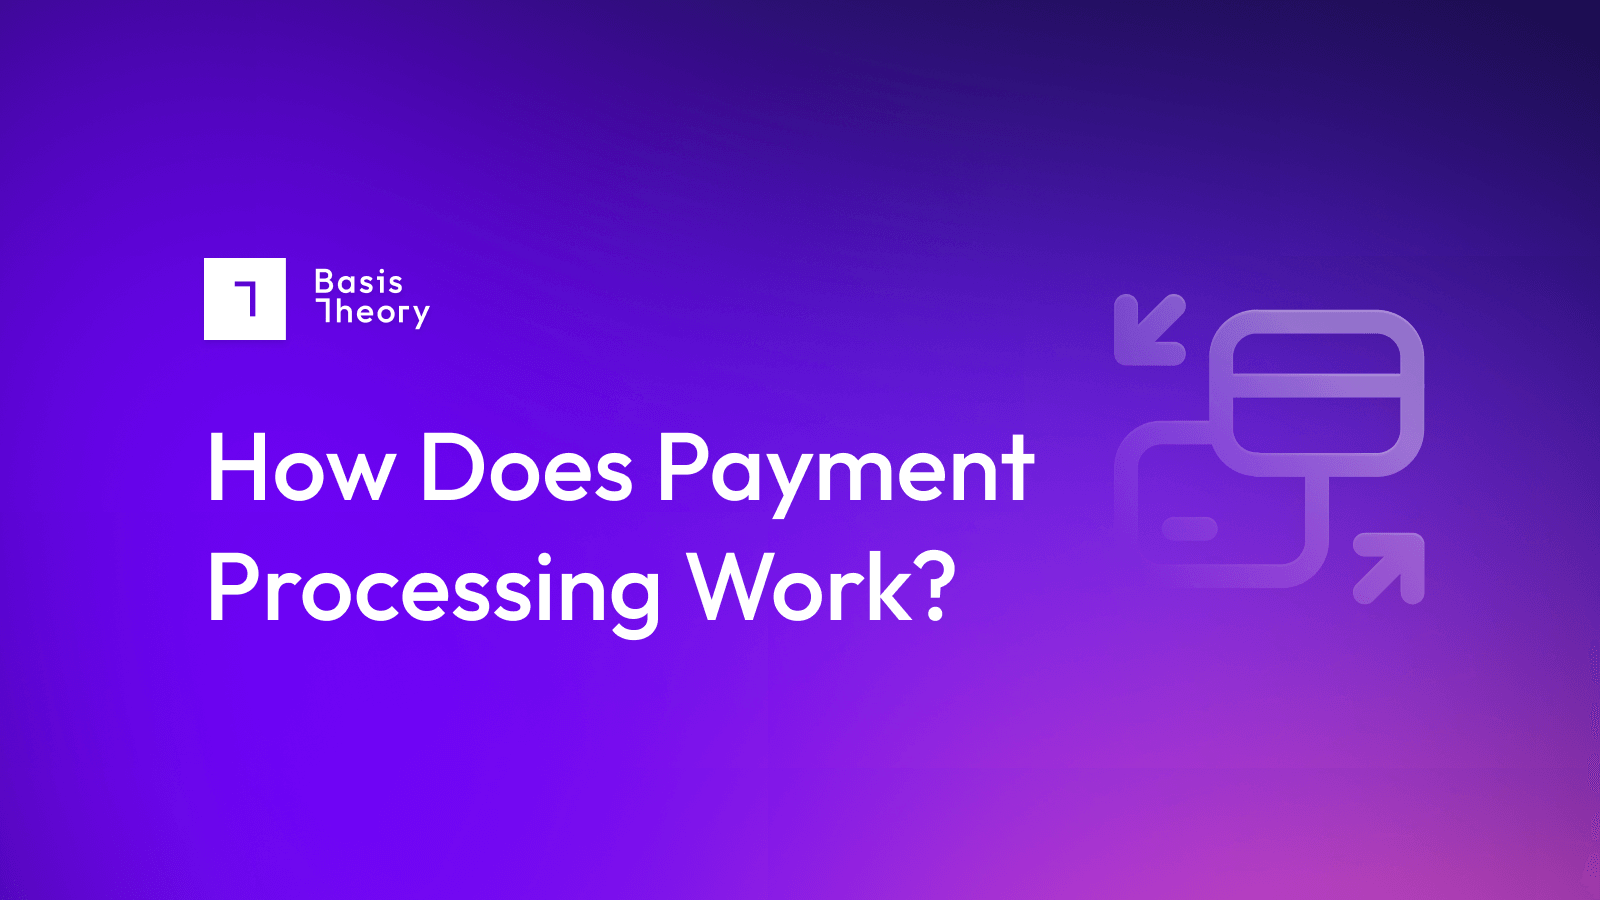 how does payment processing work?